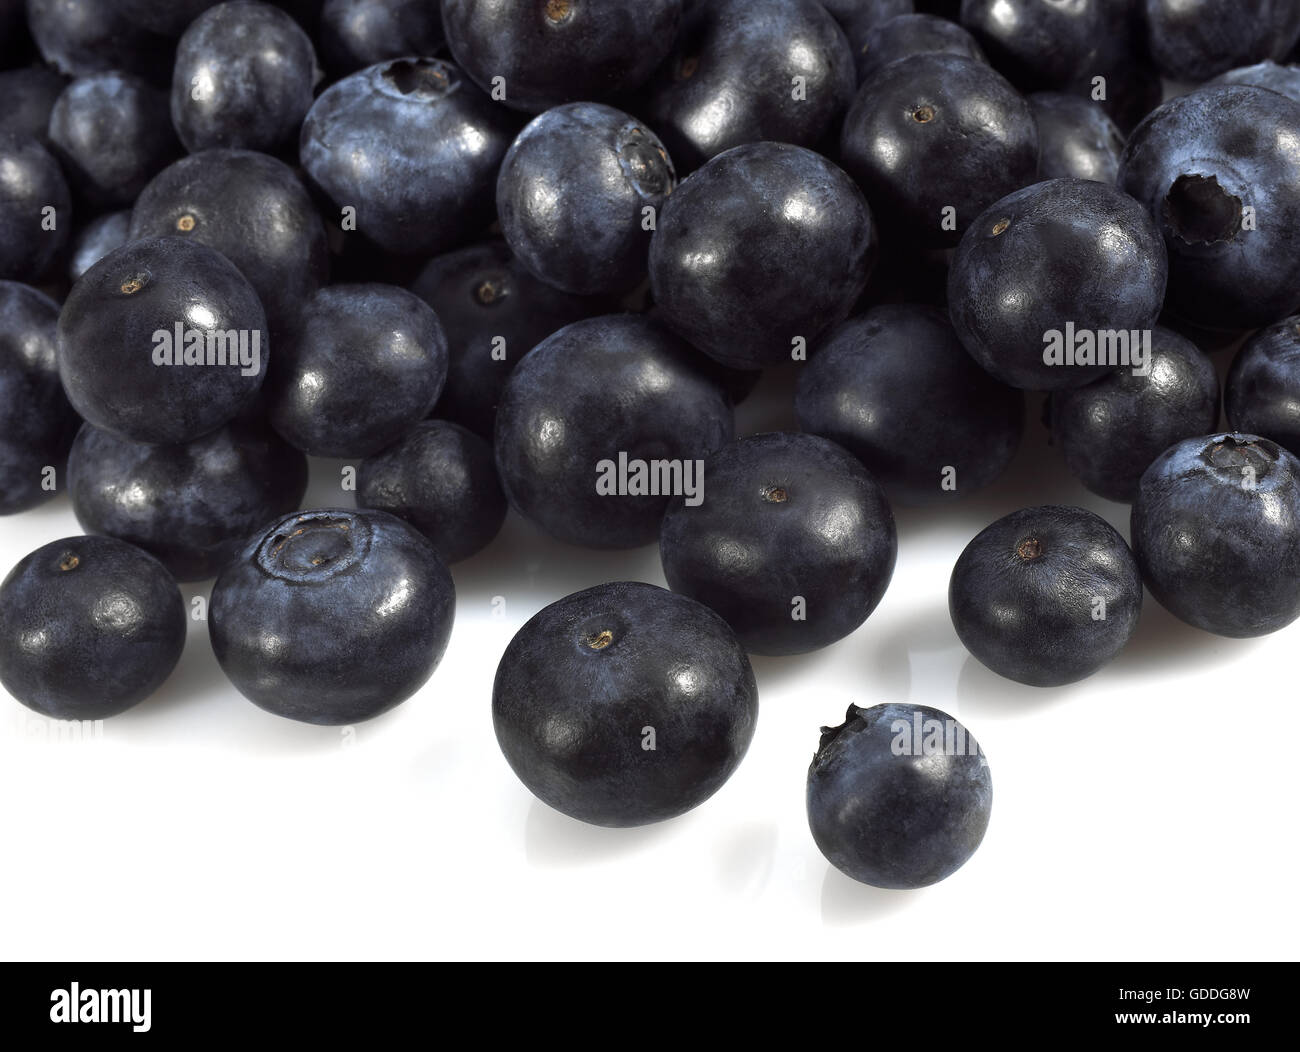 BLUEBERRY OR BILBERRY vaccinium sp AGAINST WHITE BACKGROUND Stock Photo